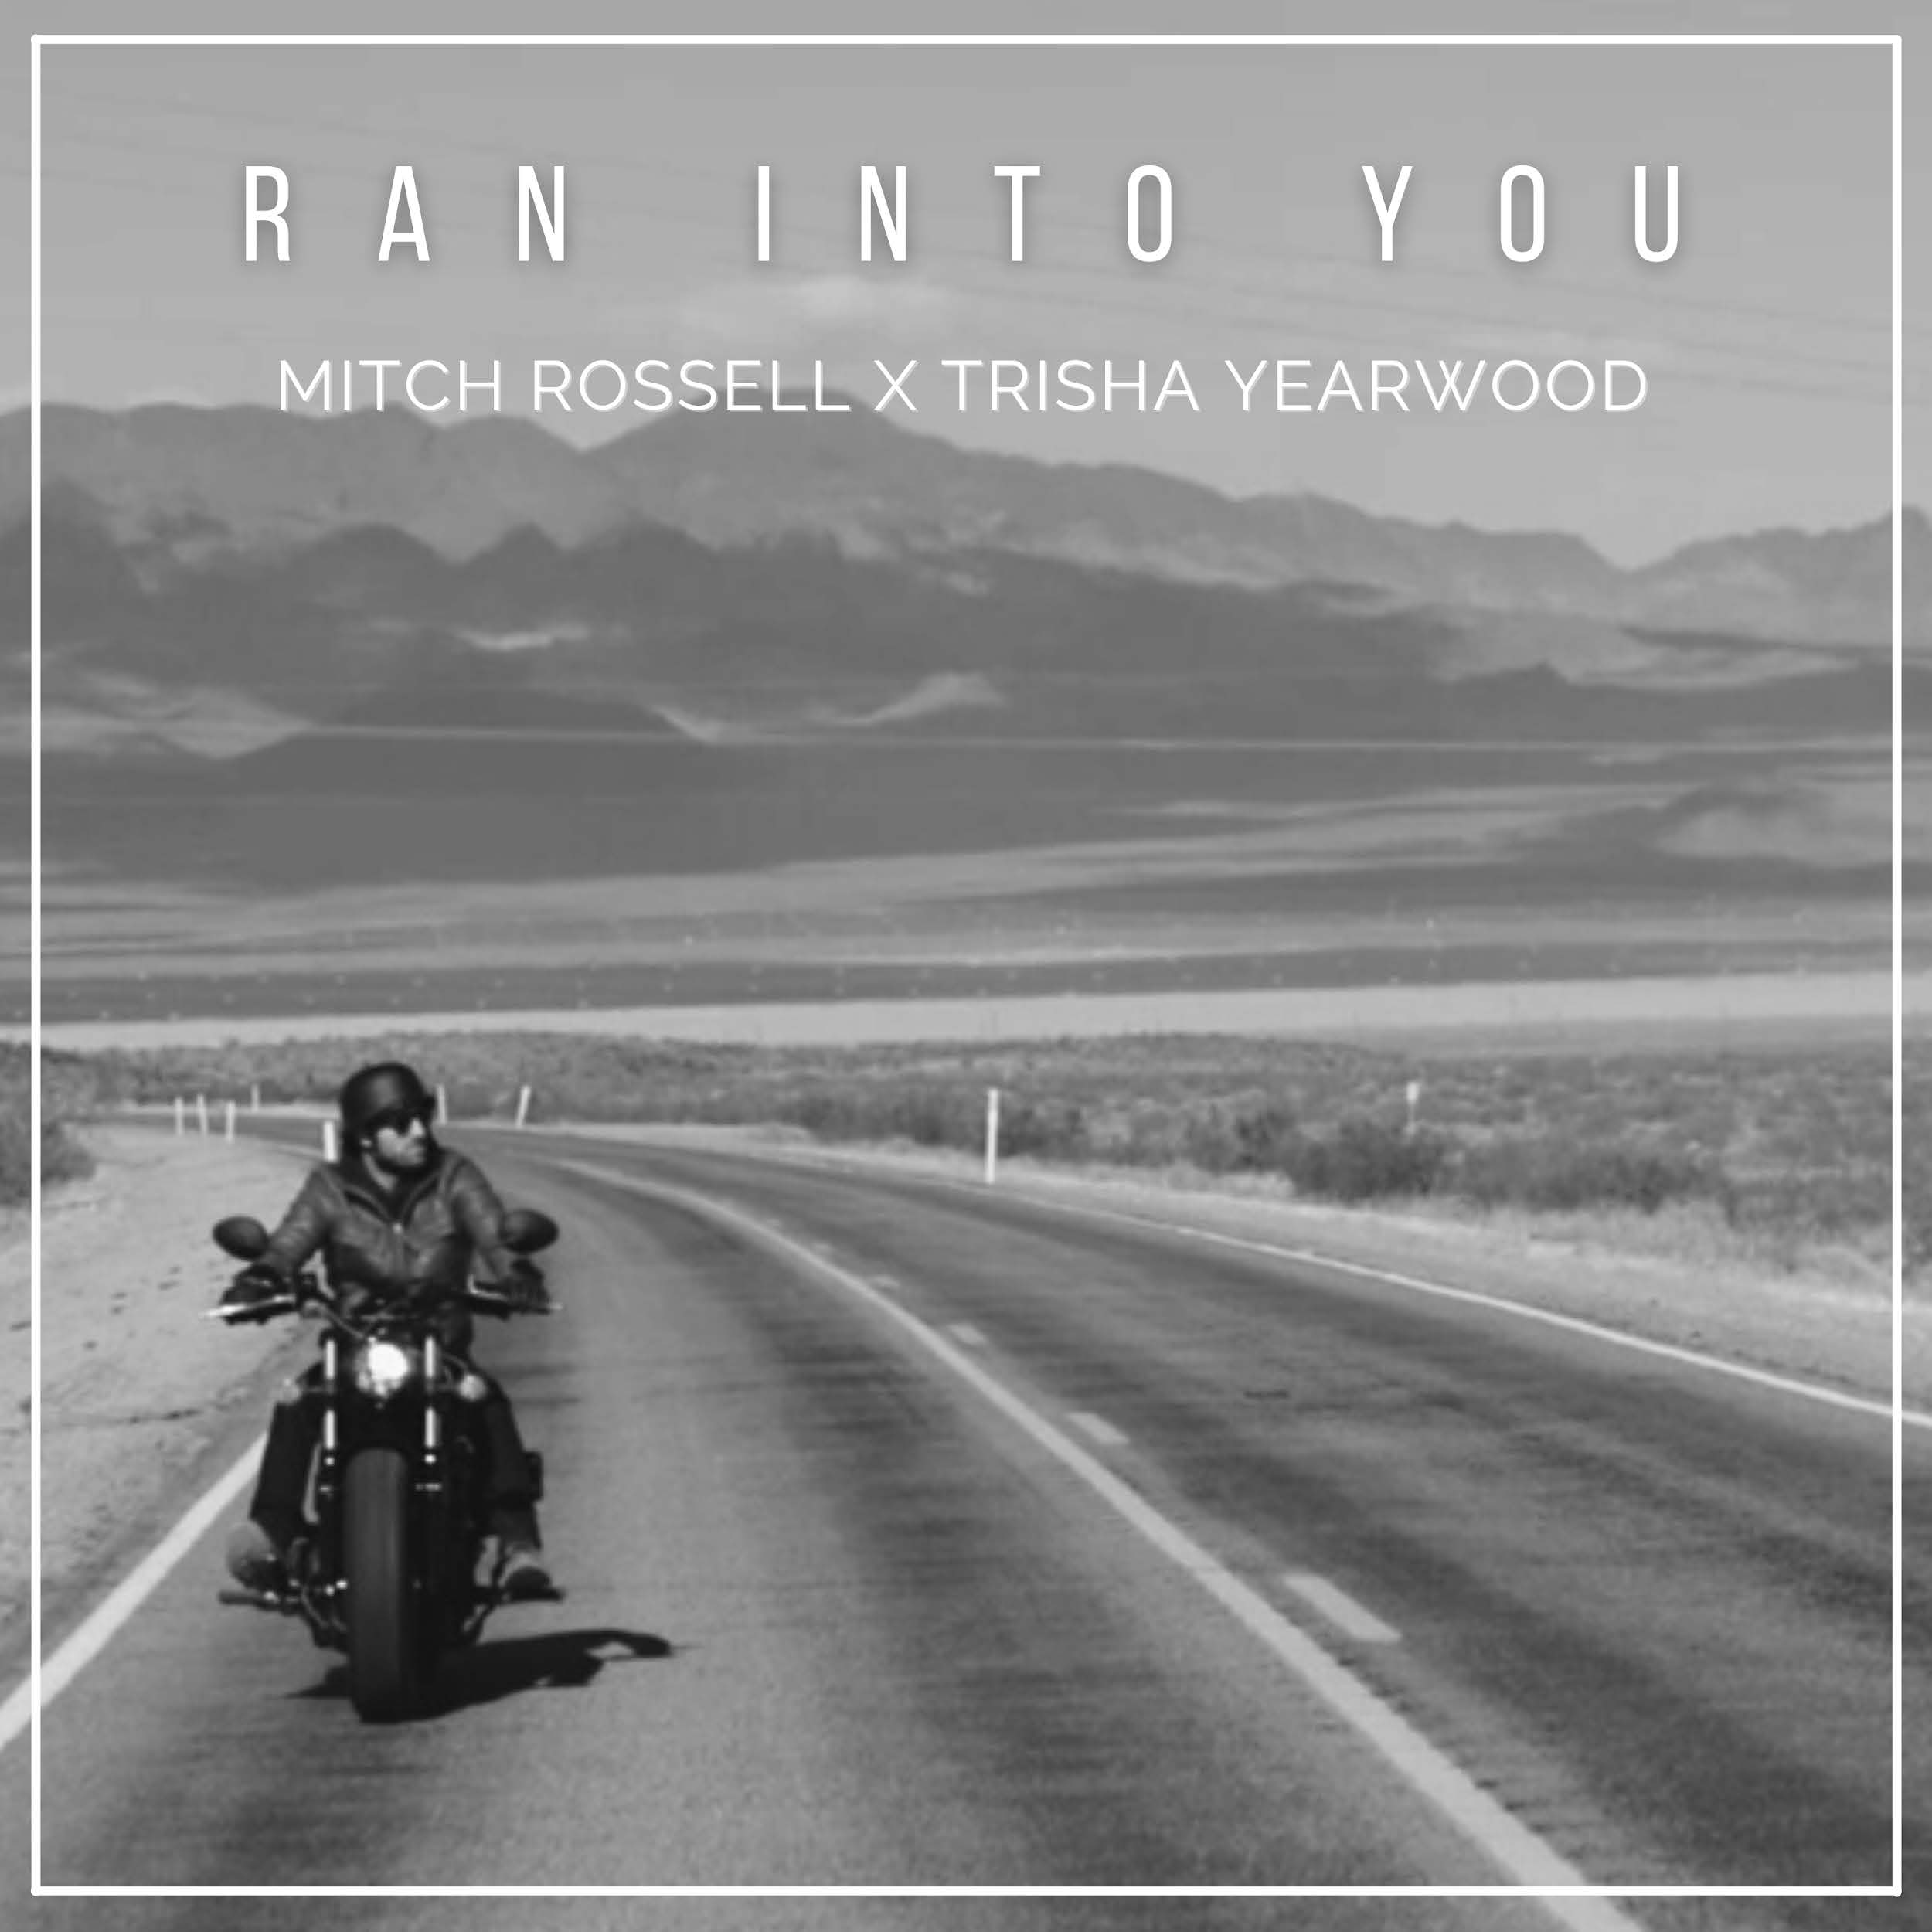 Mitch Rossell’s new song, “Ran into You” featuring Trisha Yearwood is available now